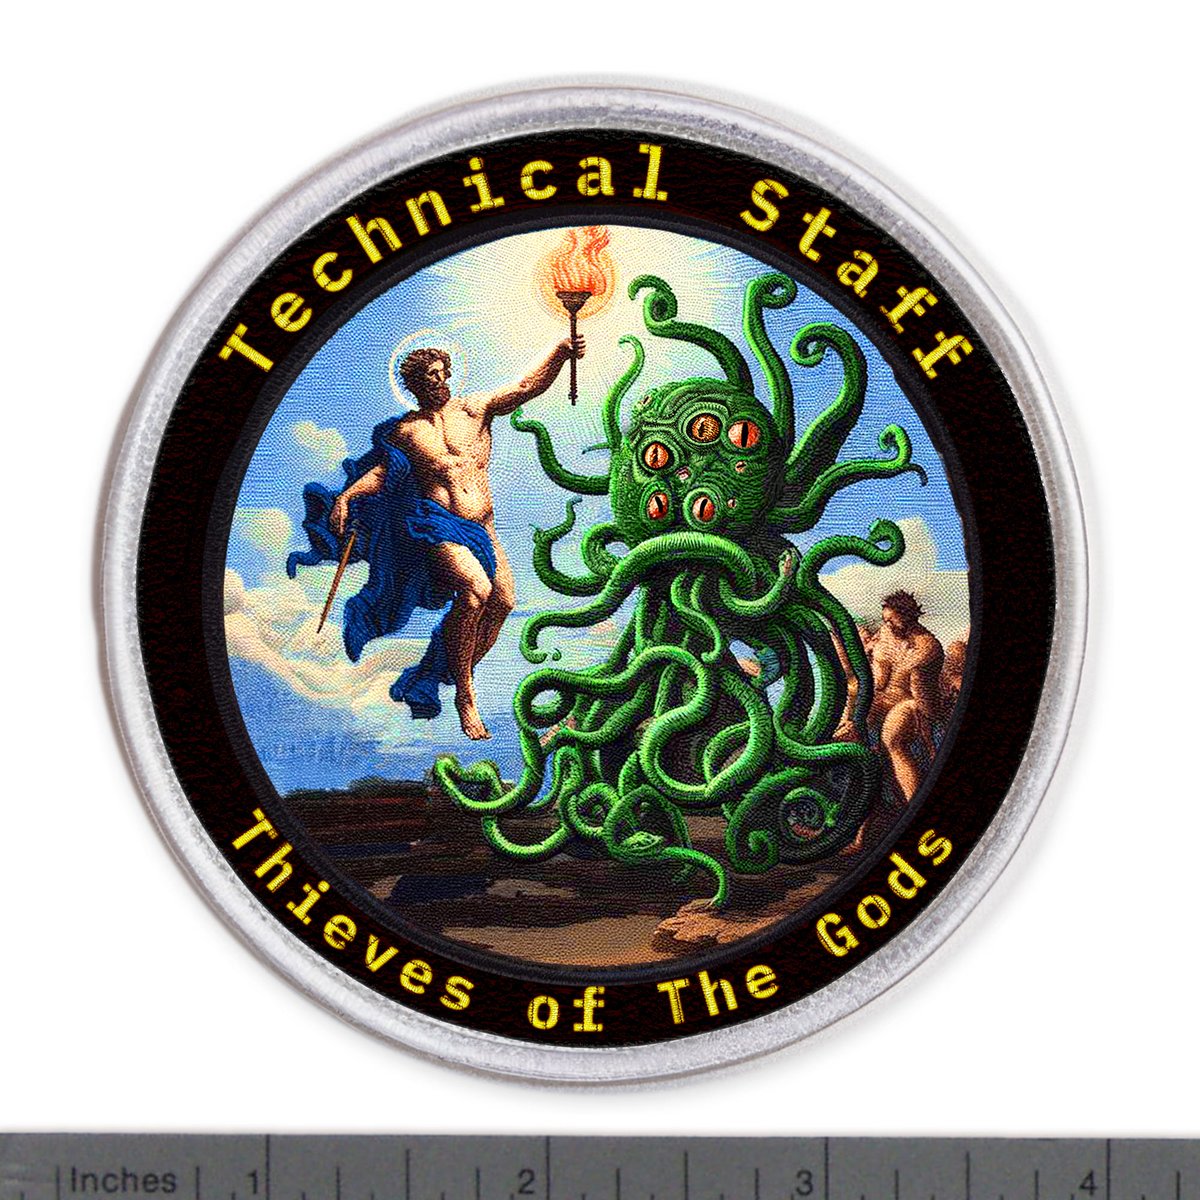 New employees in senior positions are often awarded with our iconic Senior Staff Research Mission Patches.

#CareersInTech #shoggoth